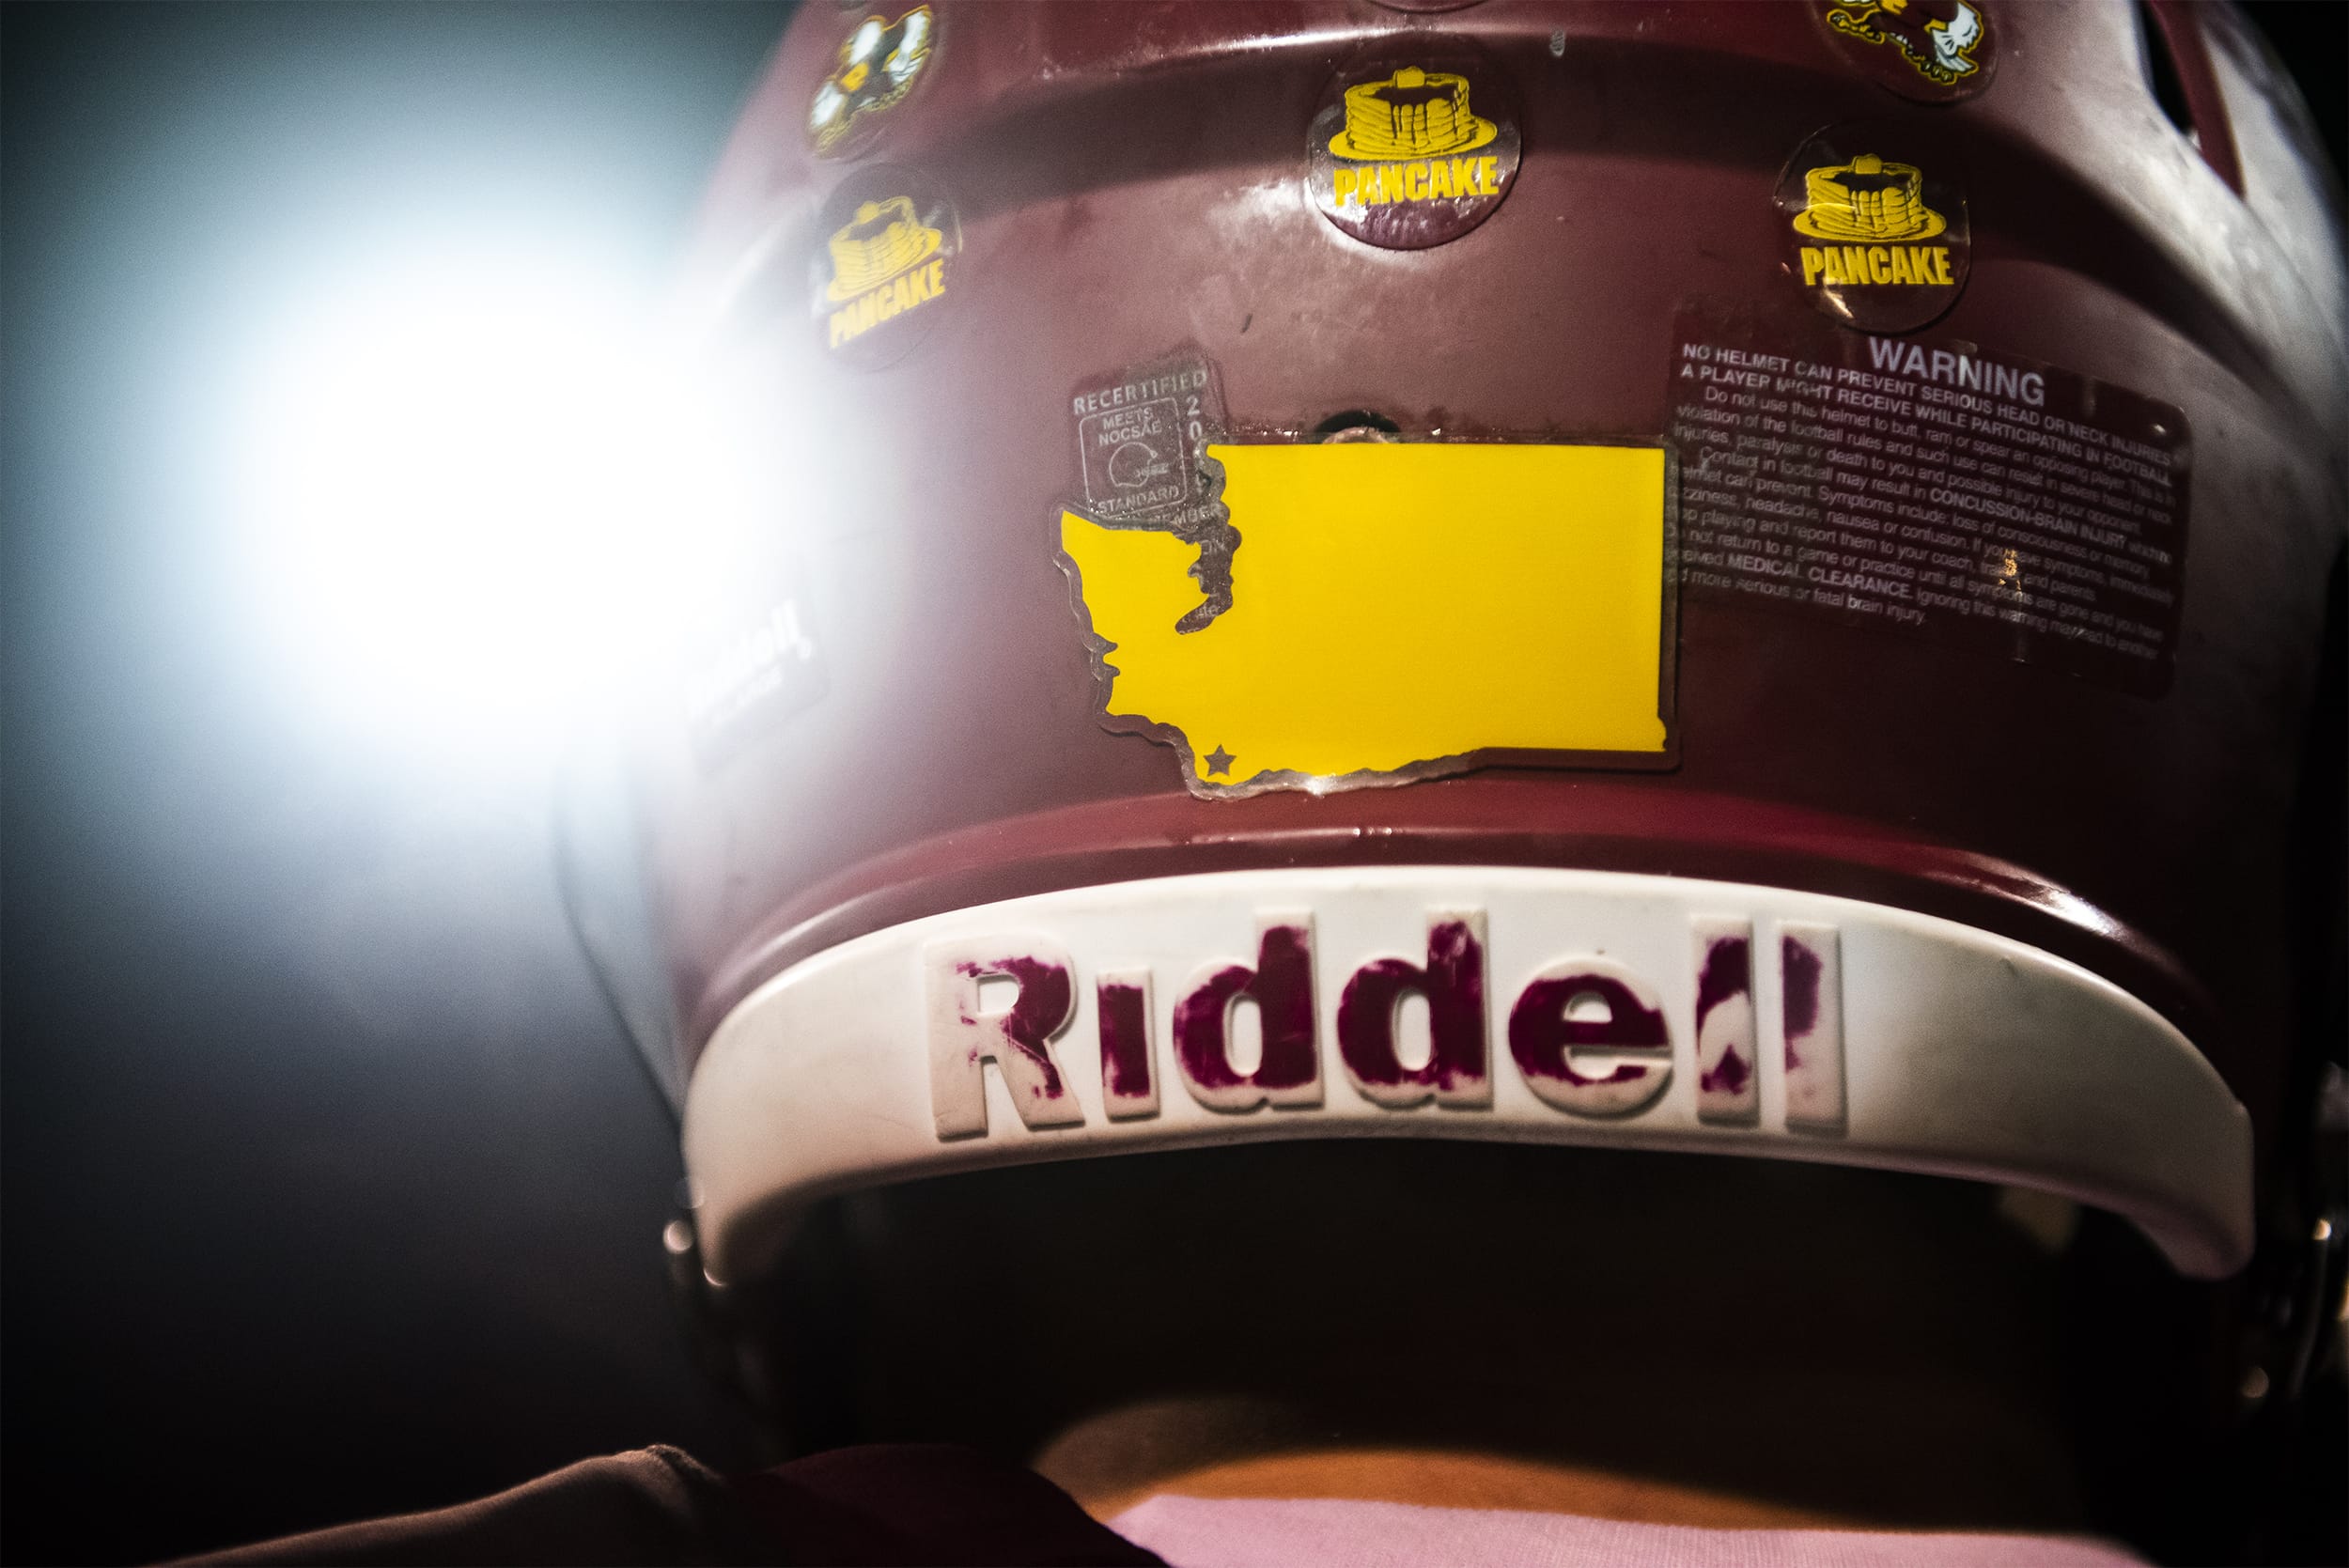 A map of Washington showing the location of Prairie High School is seen here on the back of a player's helmet.